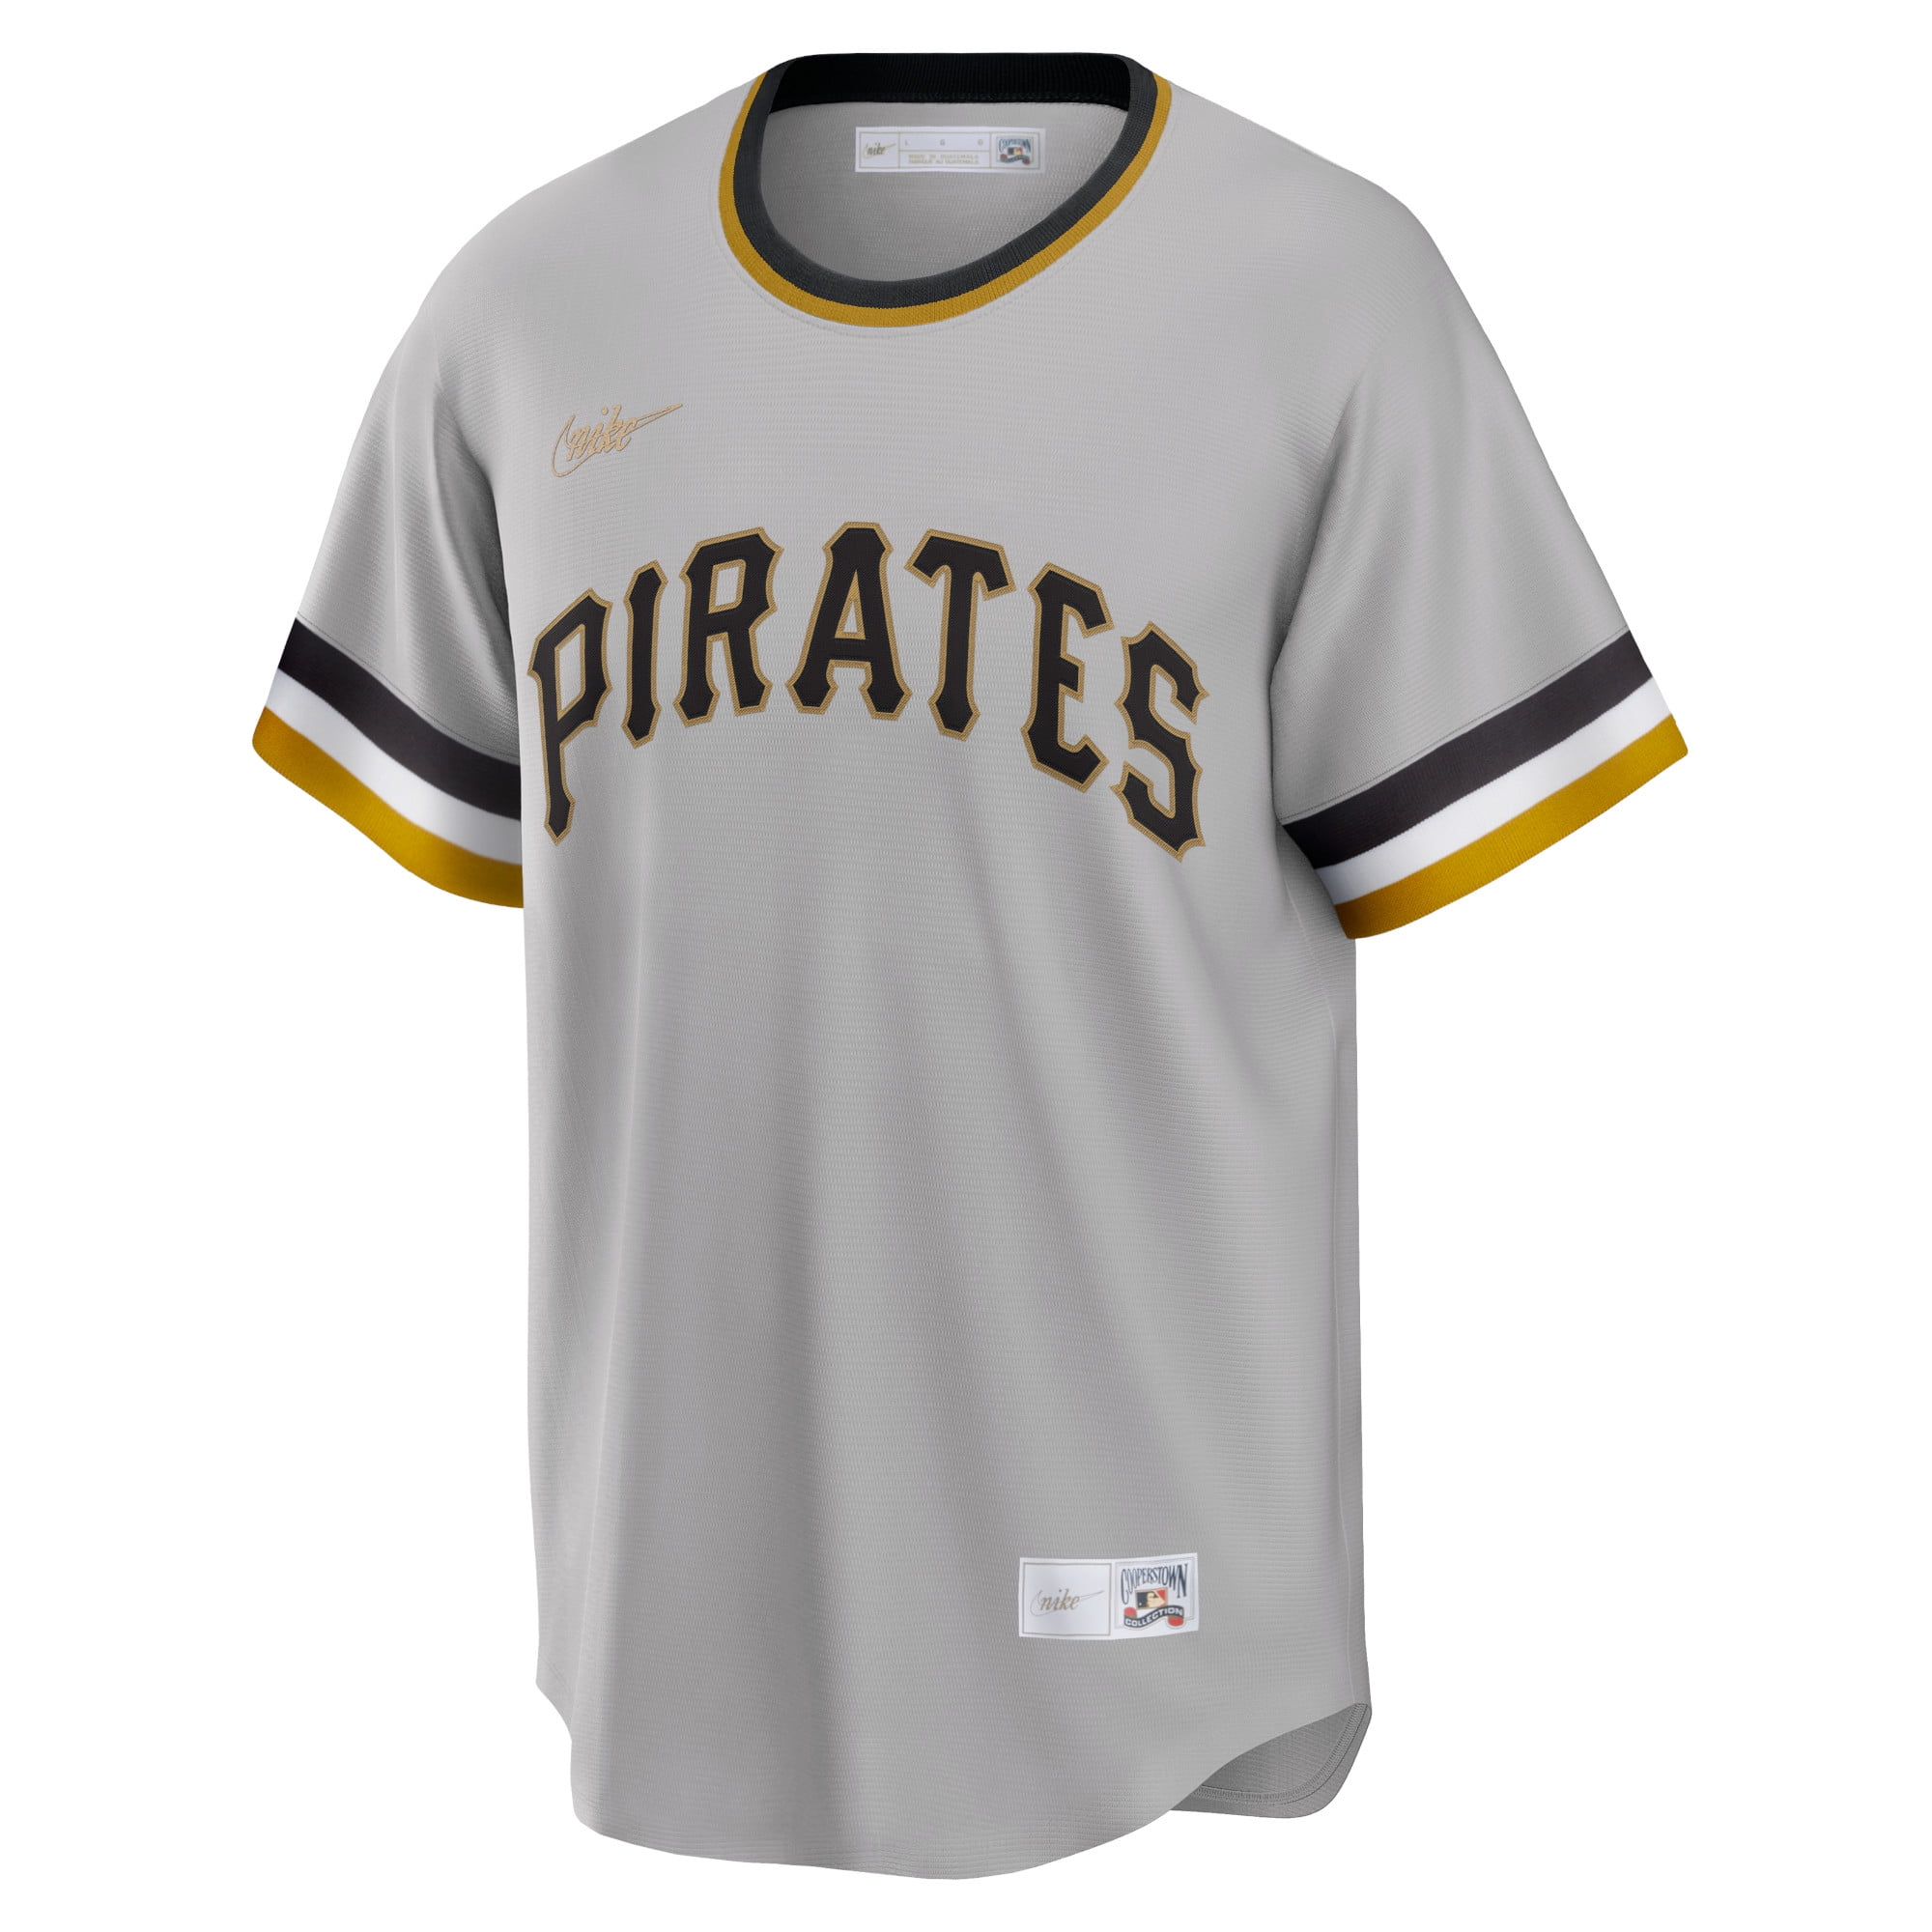 Pittsburgh Pirates Majestic MLB Youth Road Gray Replica Jersey